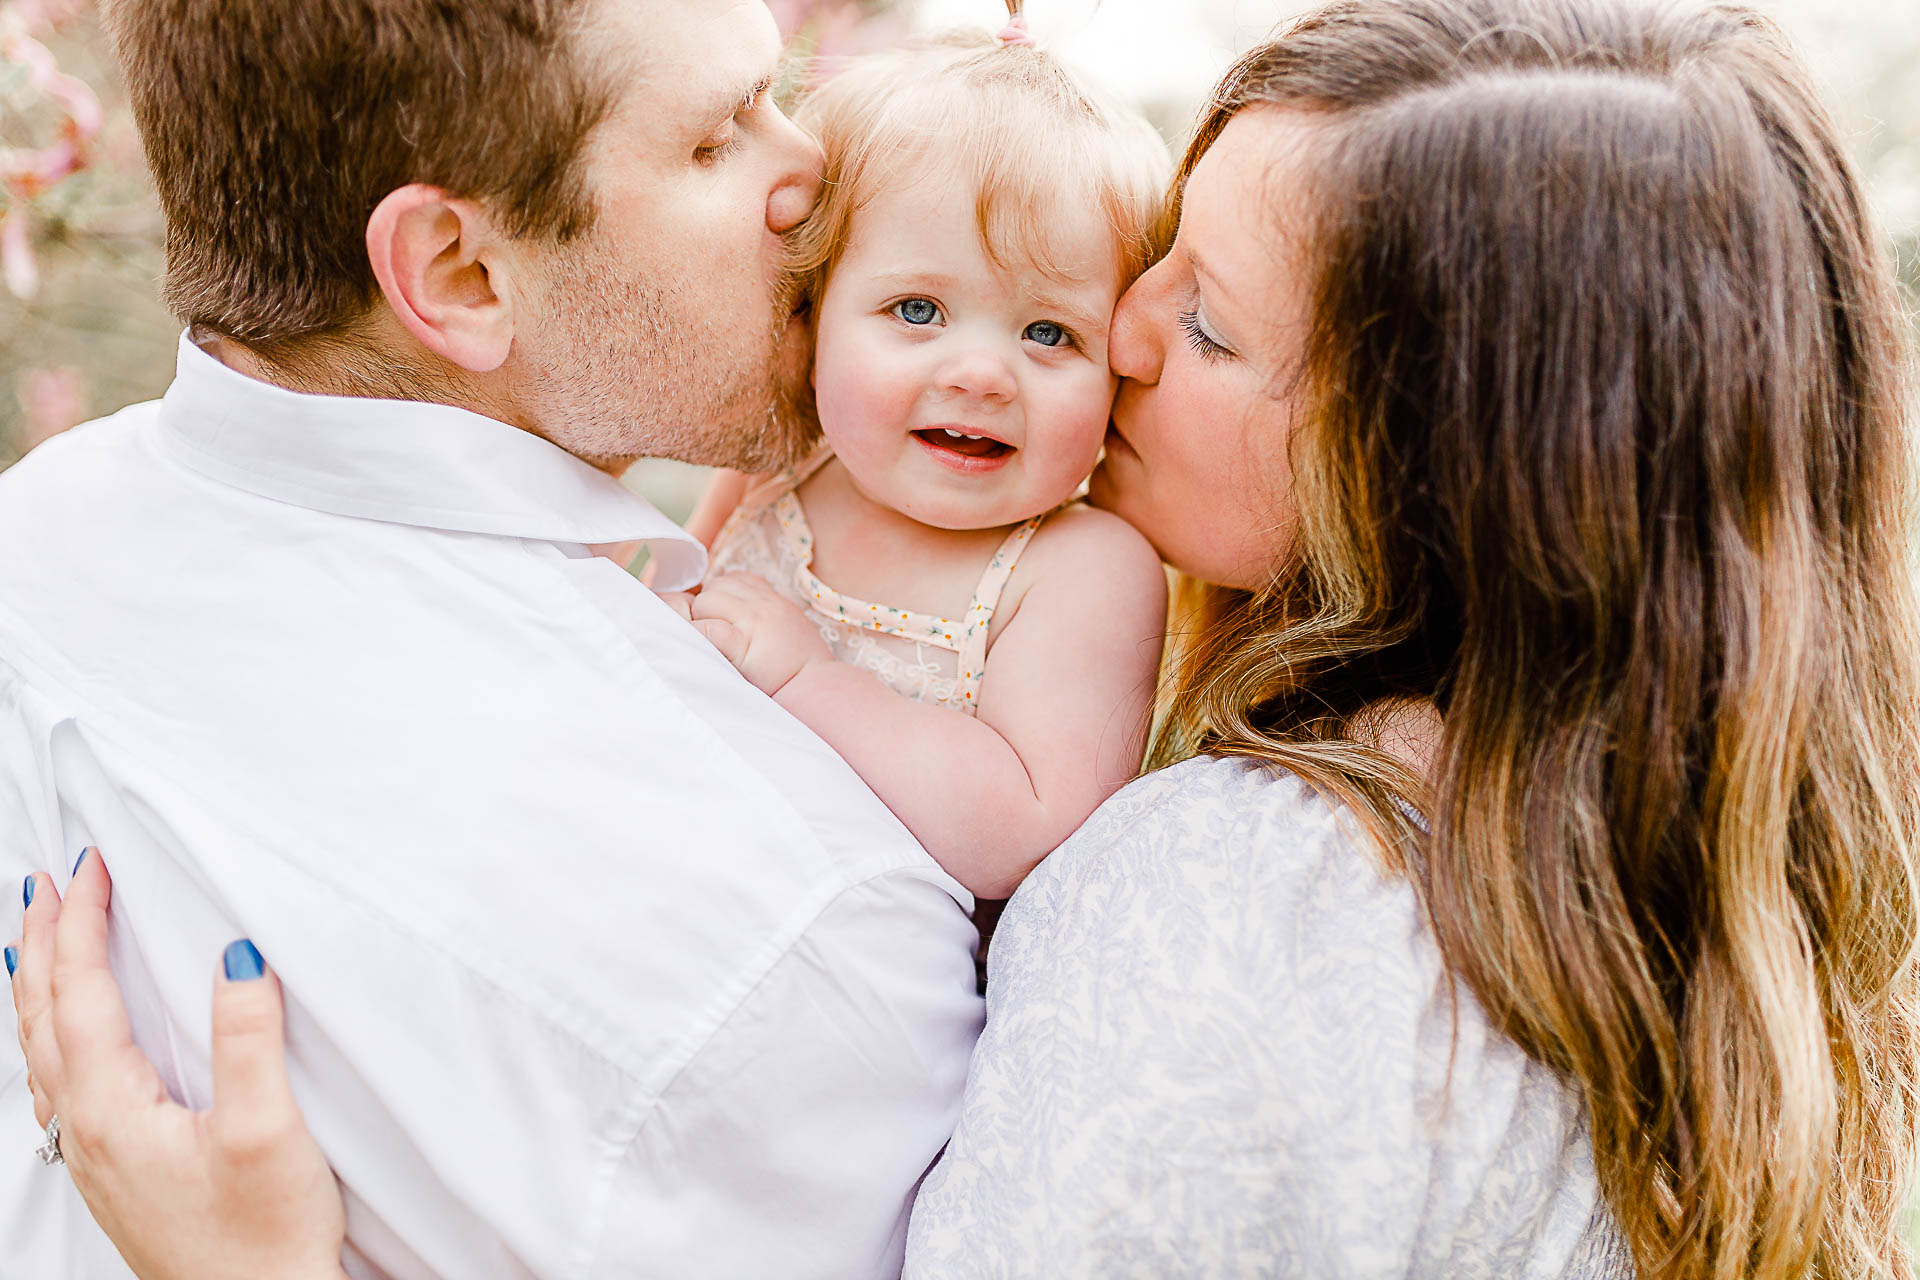 Photo by Kingston Massachusetts Photographer Christina Runnals Photography | Parents holding baby daughter
 